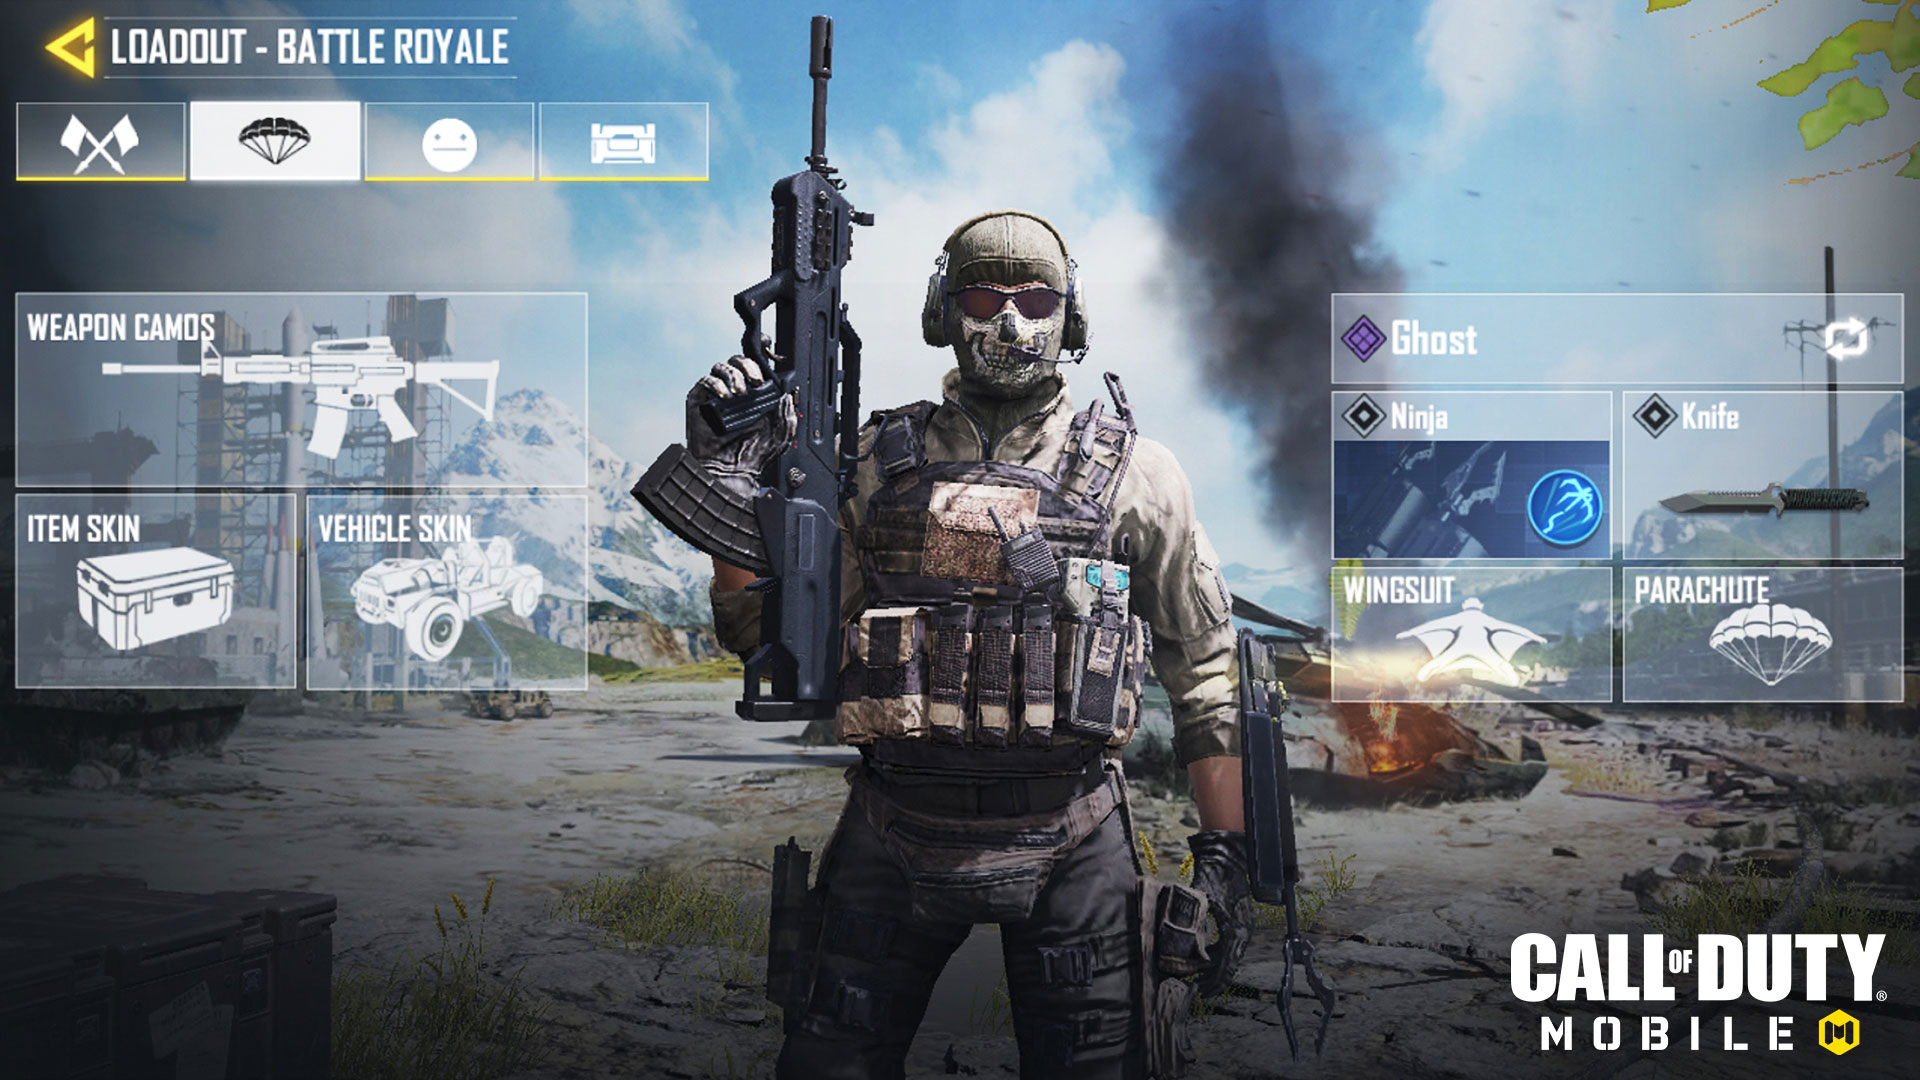 Electronic Arts Puts the Battle-Royale Mode in Battlefield Game - Bloomberg